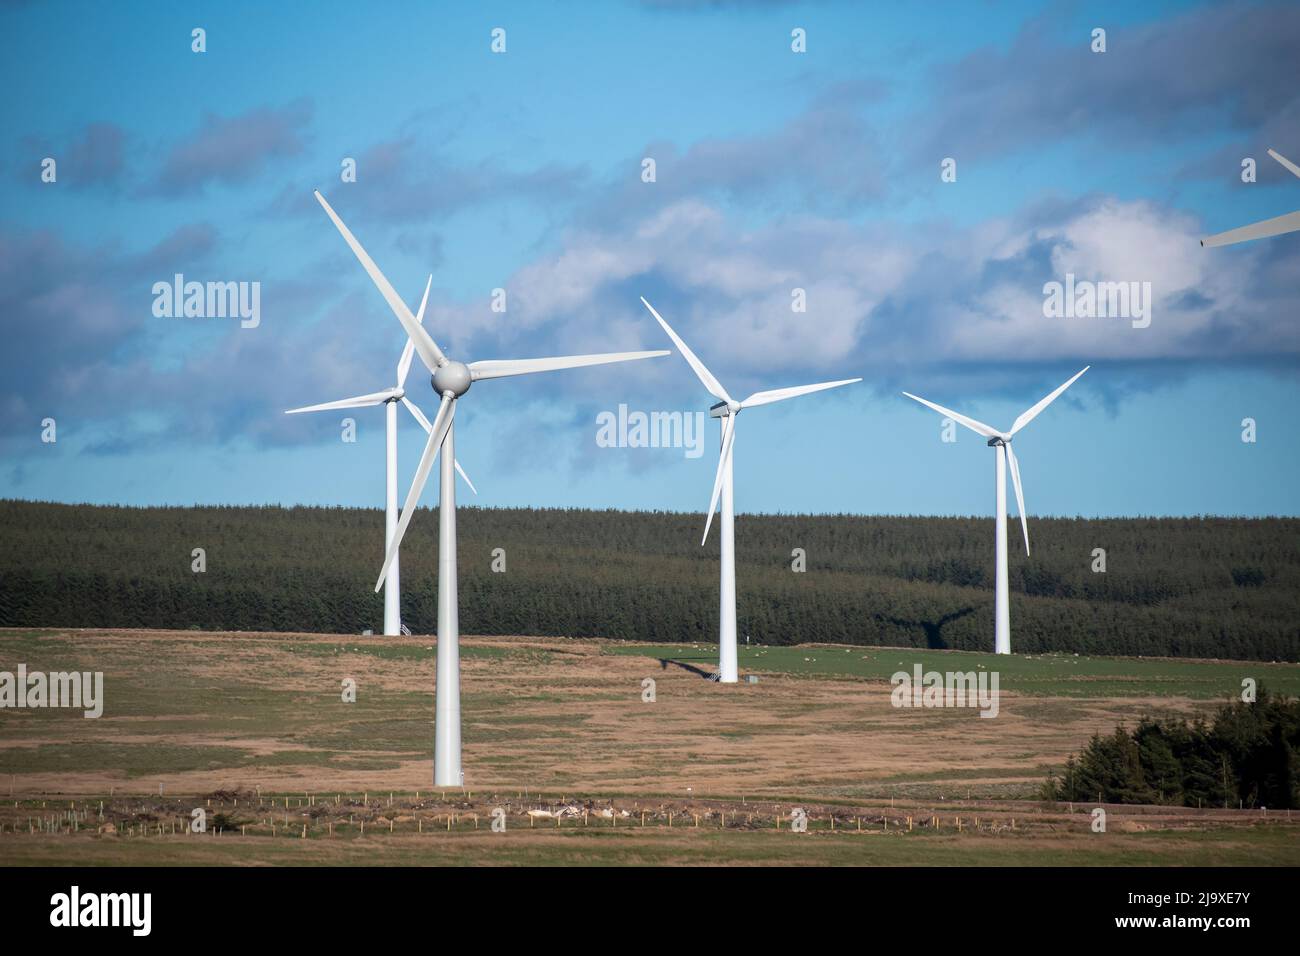 Wind Farm near Kielder in Northumberland, England on a Spring day with a forest and white clouds behind Stock Photo